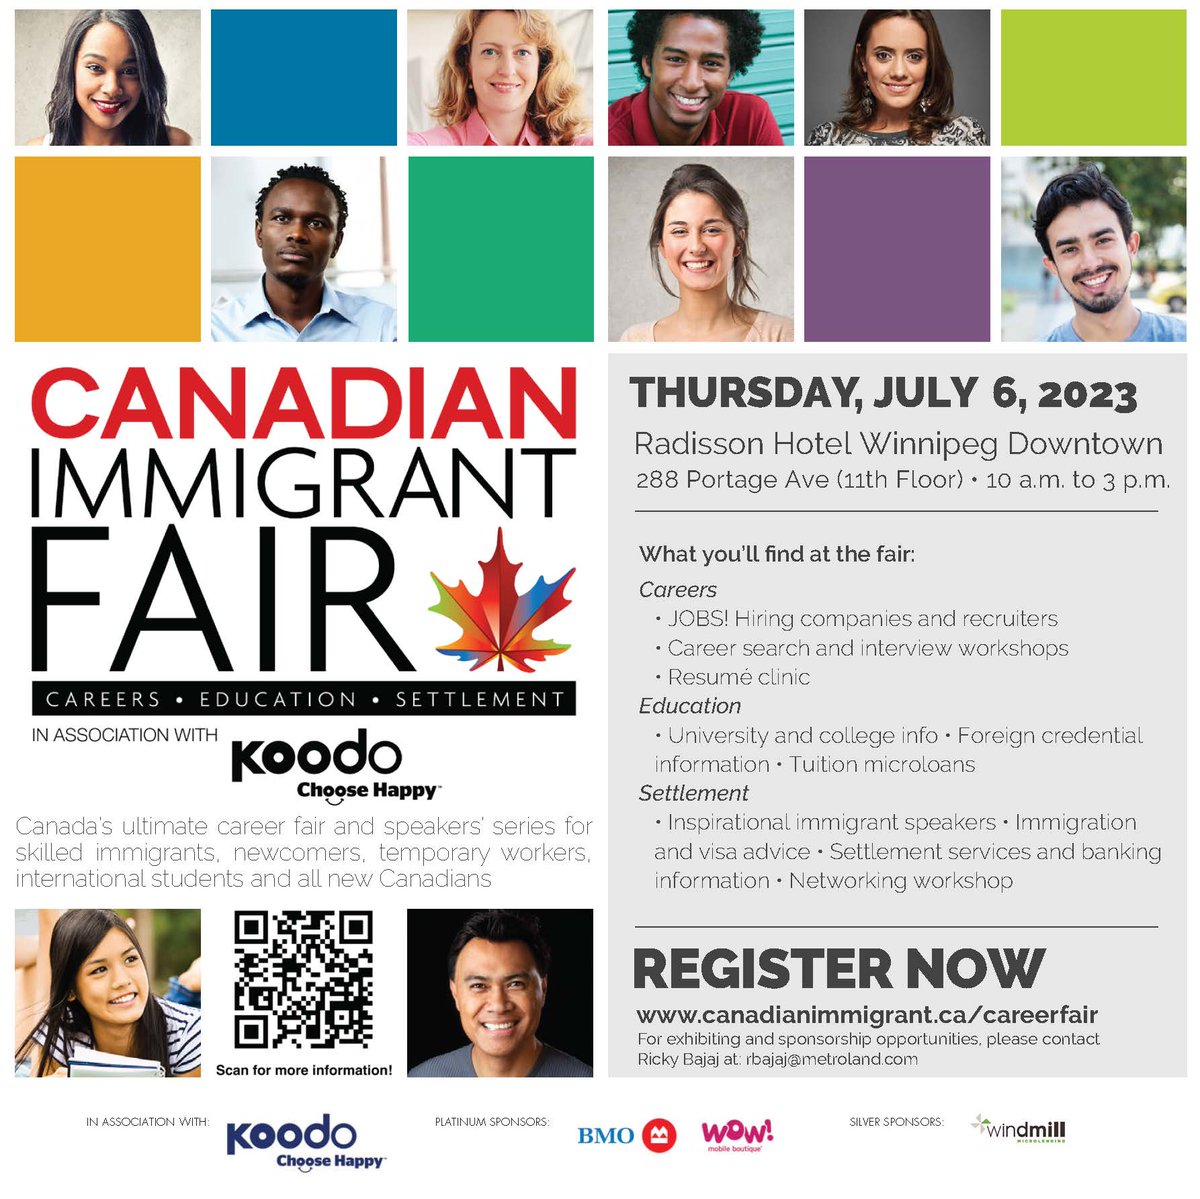 Join Canadian Immigrant Fair, a Canada's ultimate #CareerFair and speakers' series for #SkilledImmigrants, #newcomers, temporary workers, international students and all new Canadians on JUL 6 at 10 AM.